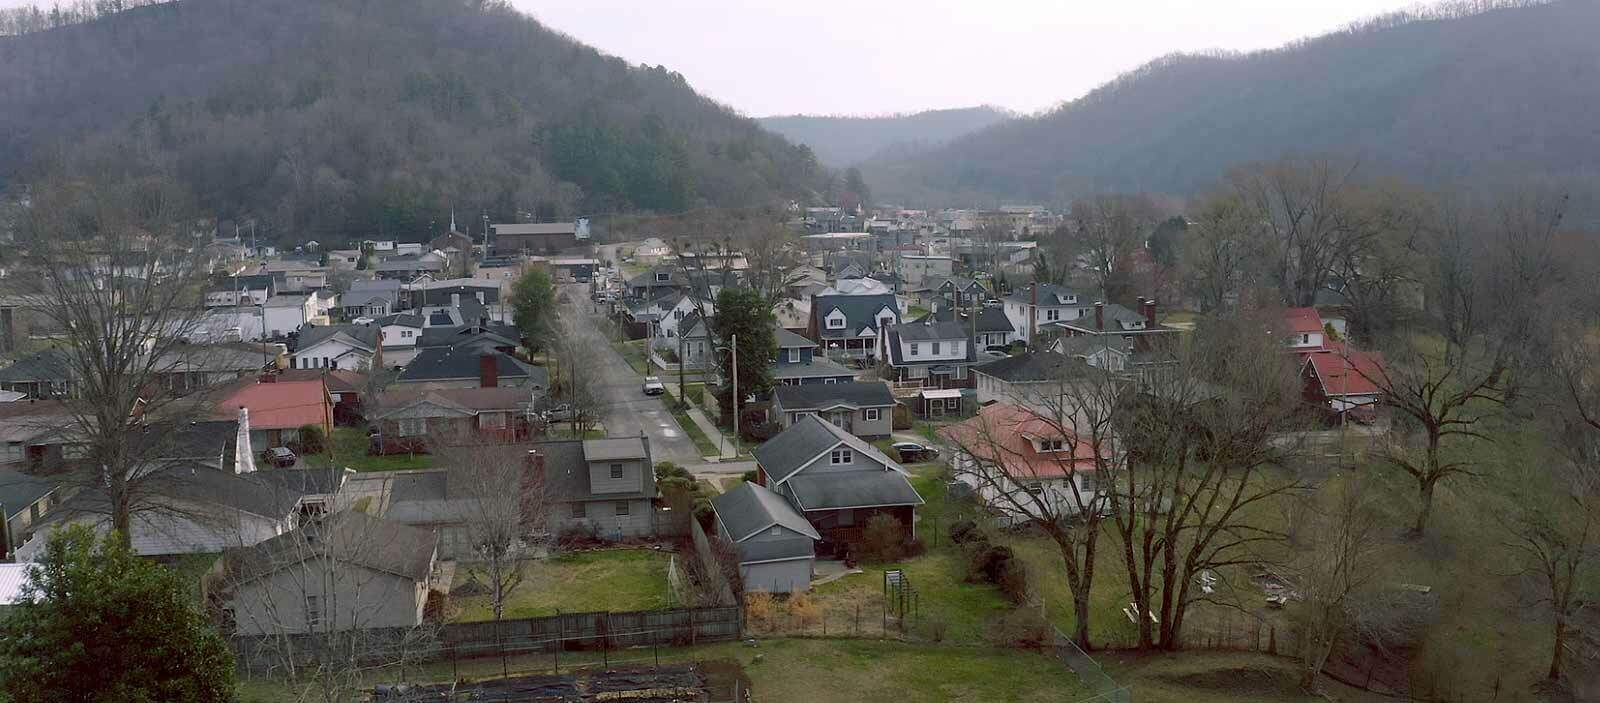 A small neighborhood of homes tucked between two tree covered mountains.